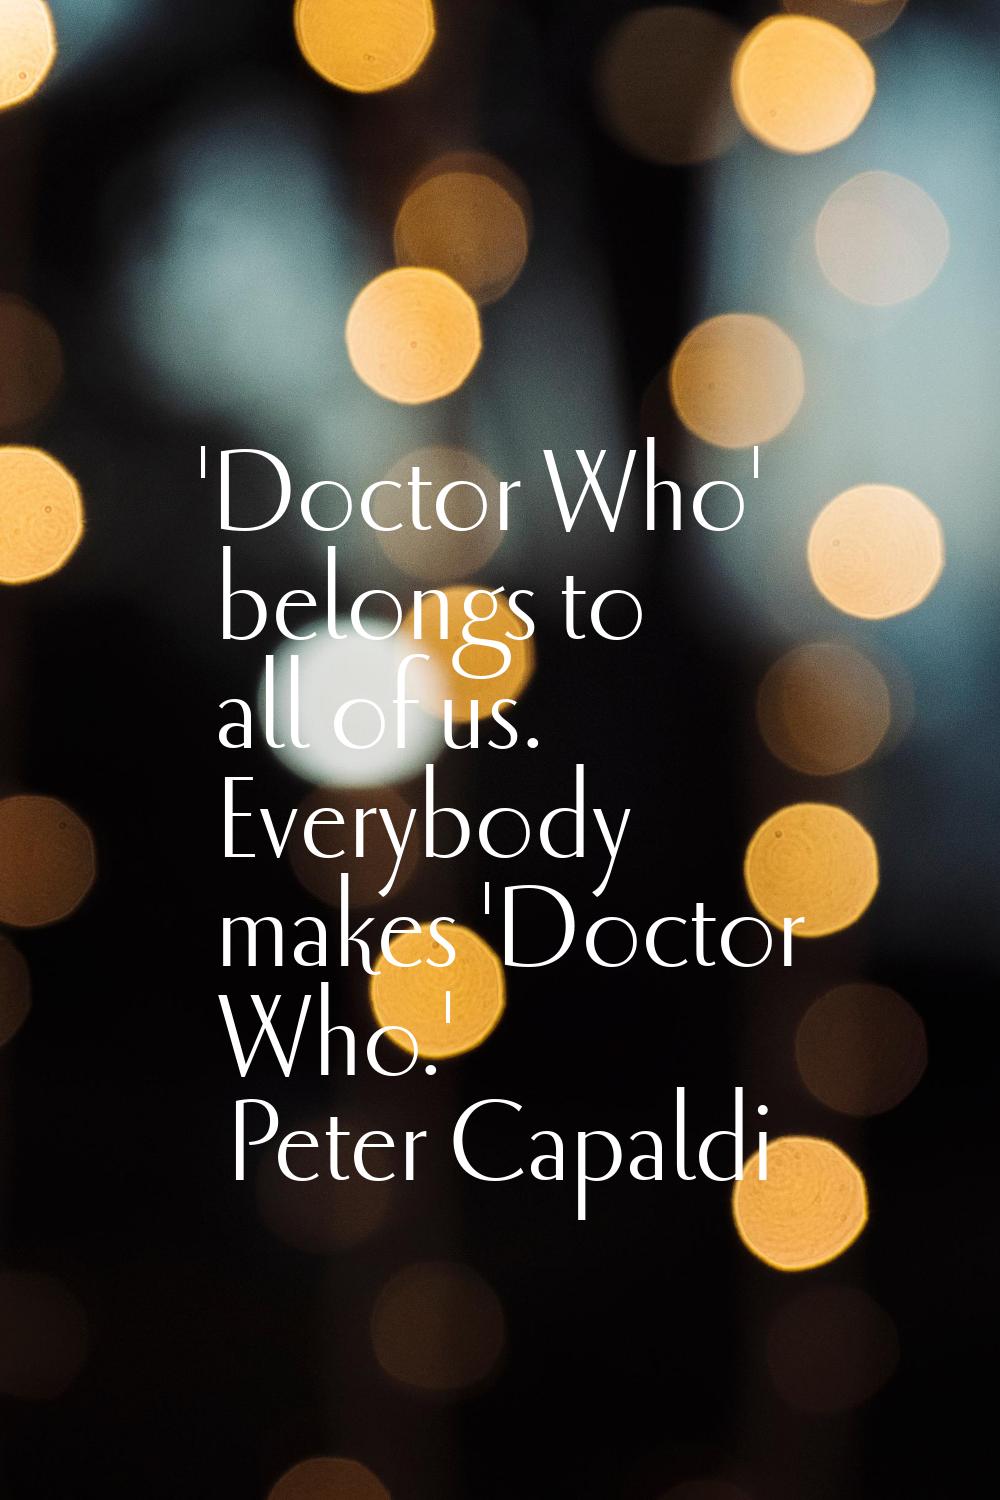 'Doctor Who' belongs to all of us. Everybody makes 'Doctor Who.'